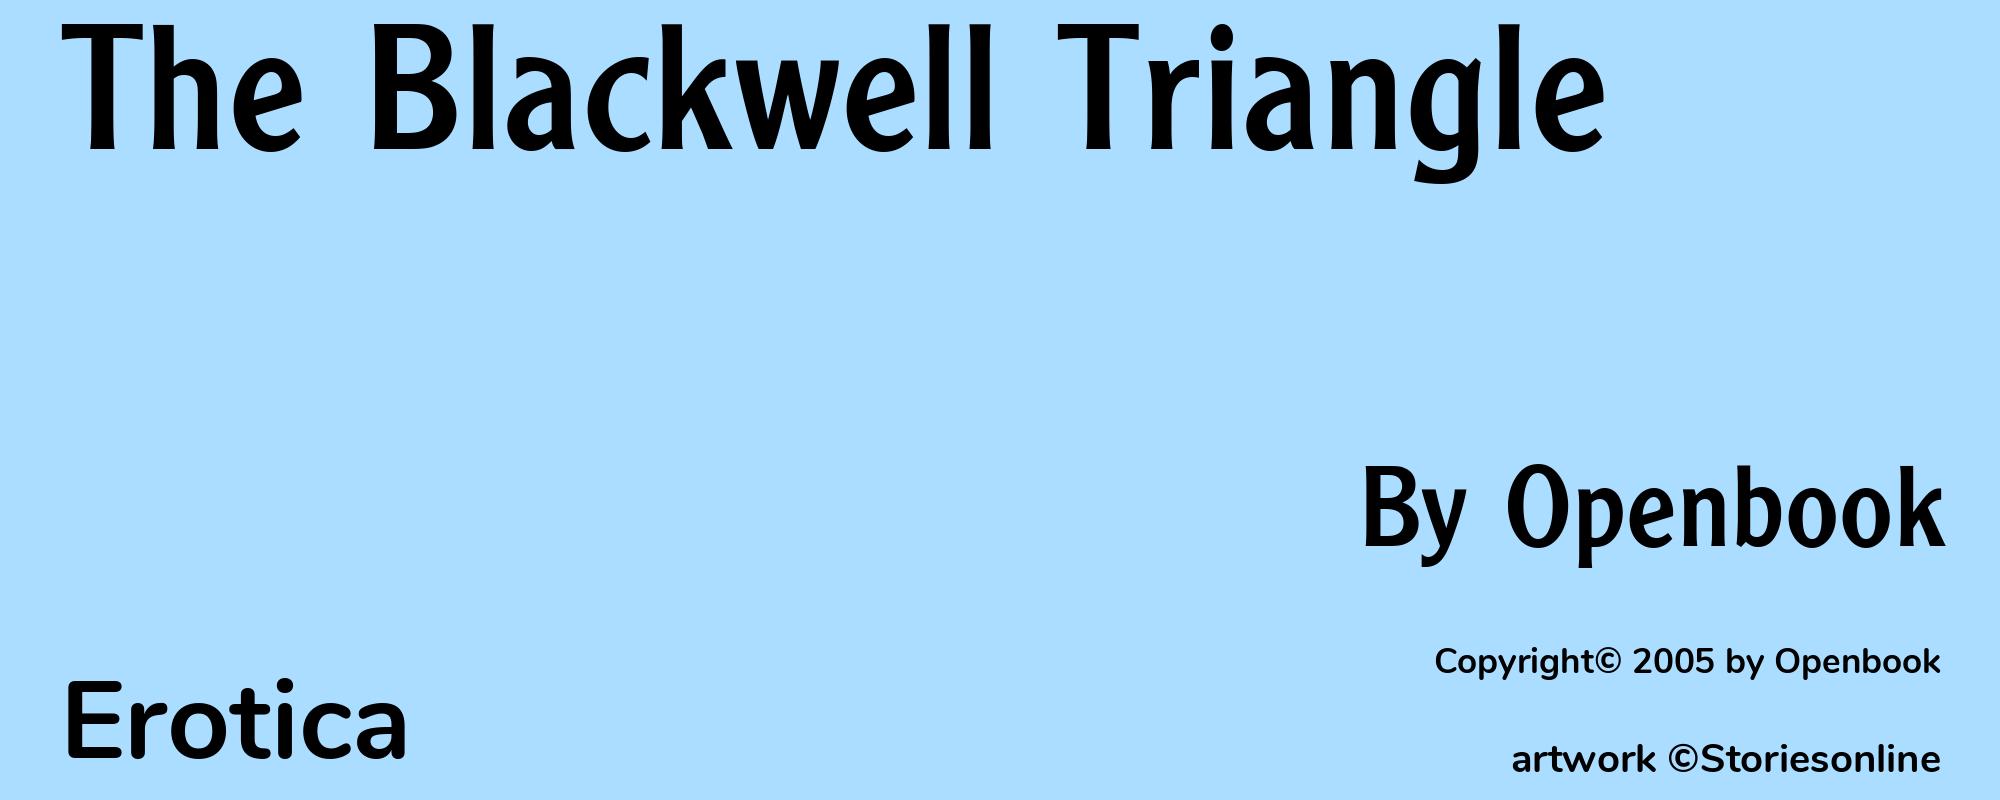 The Blackwell Triangle - Cover